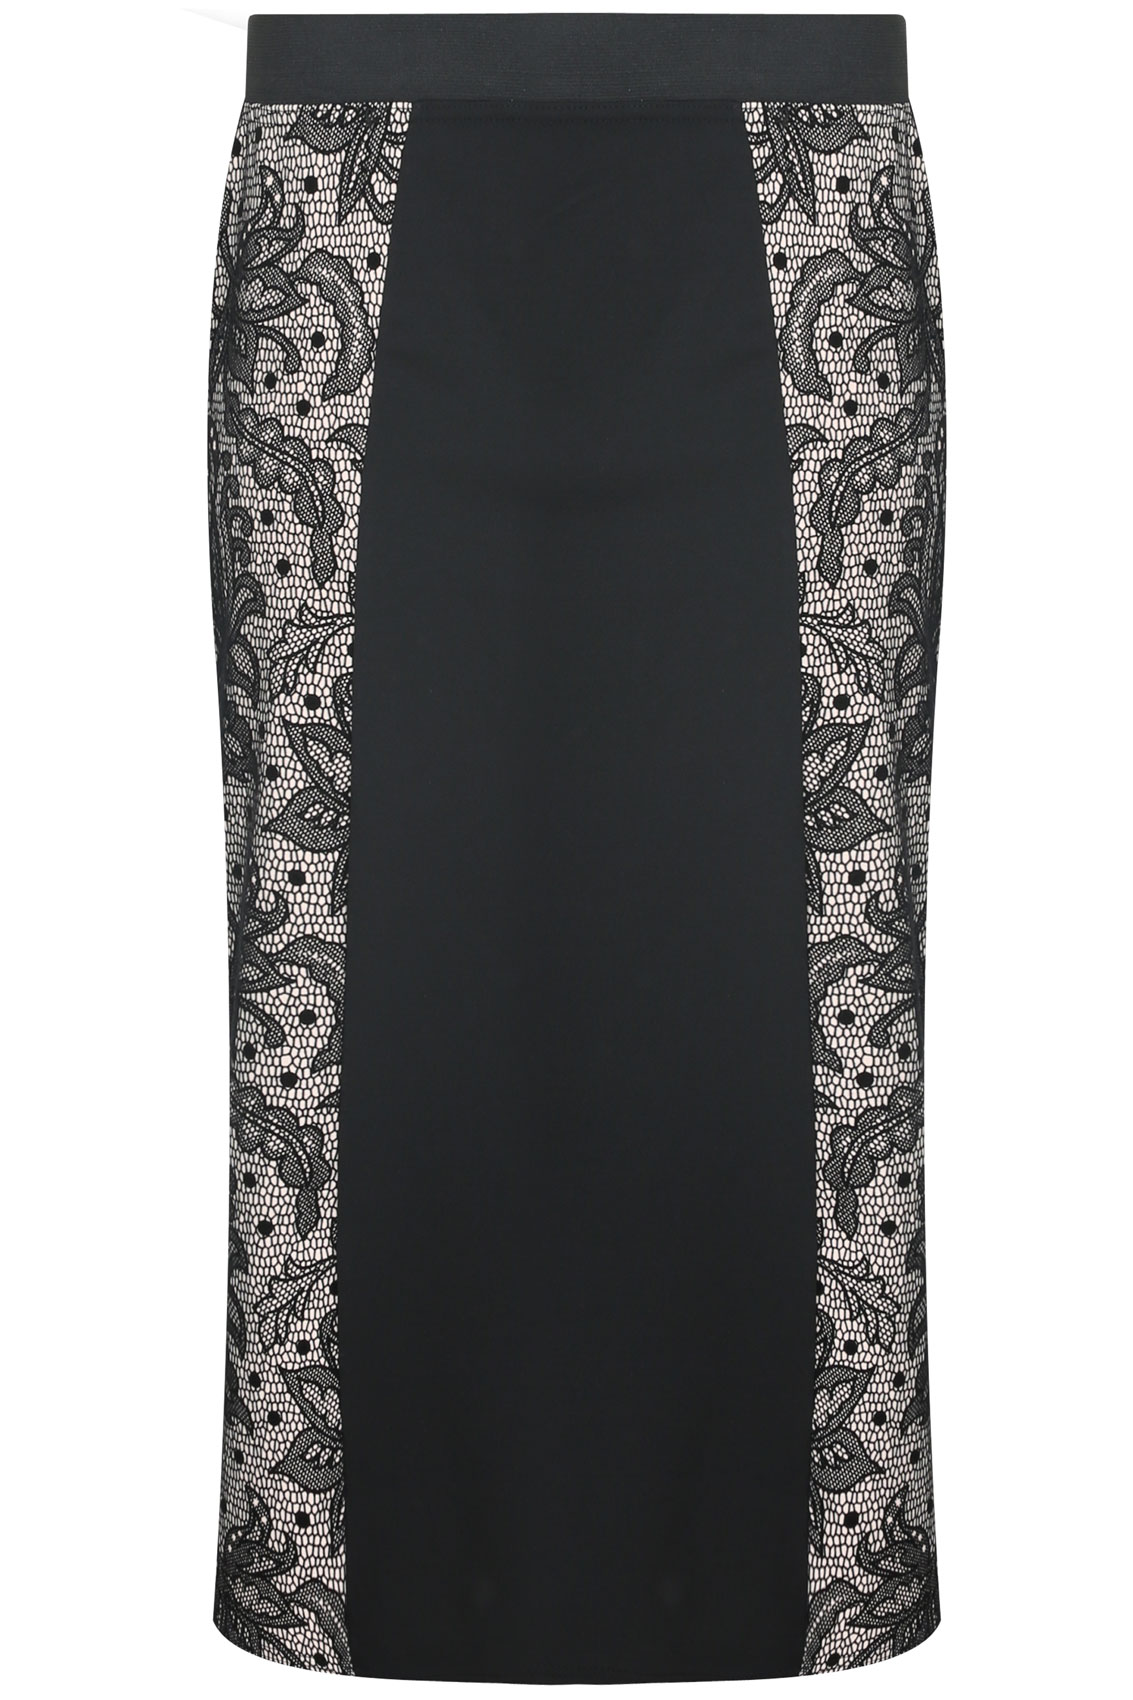 Black Midi Pencil Skirt With Floral Flocked Lace Panel